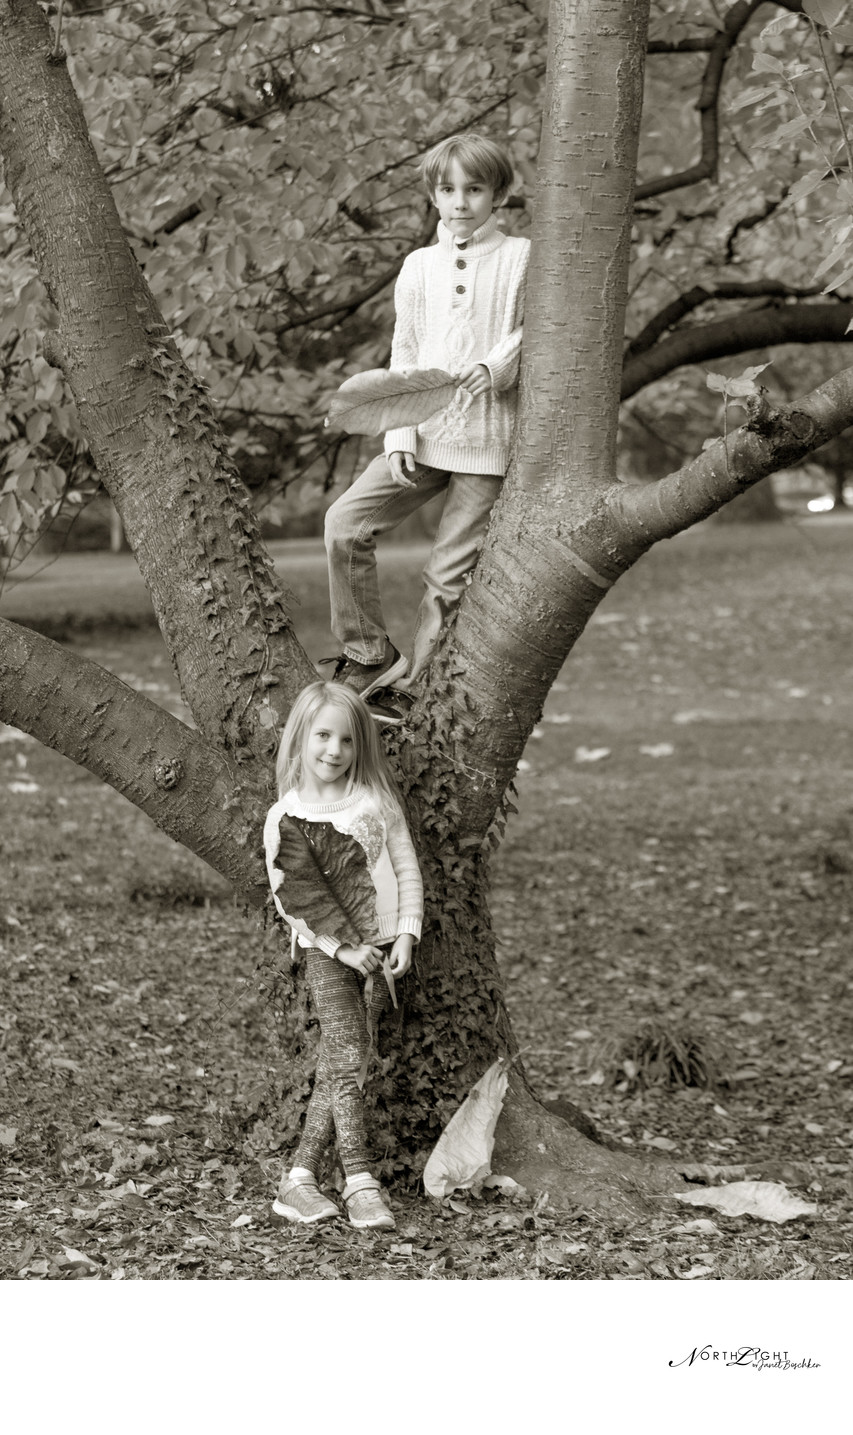 Boy and Girl Photograph in Tree at Park B&W